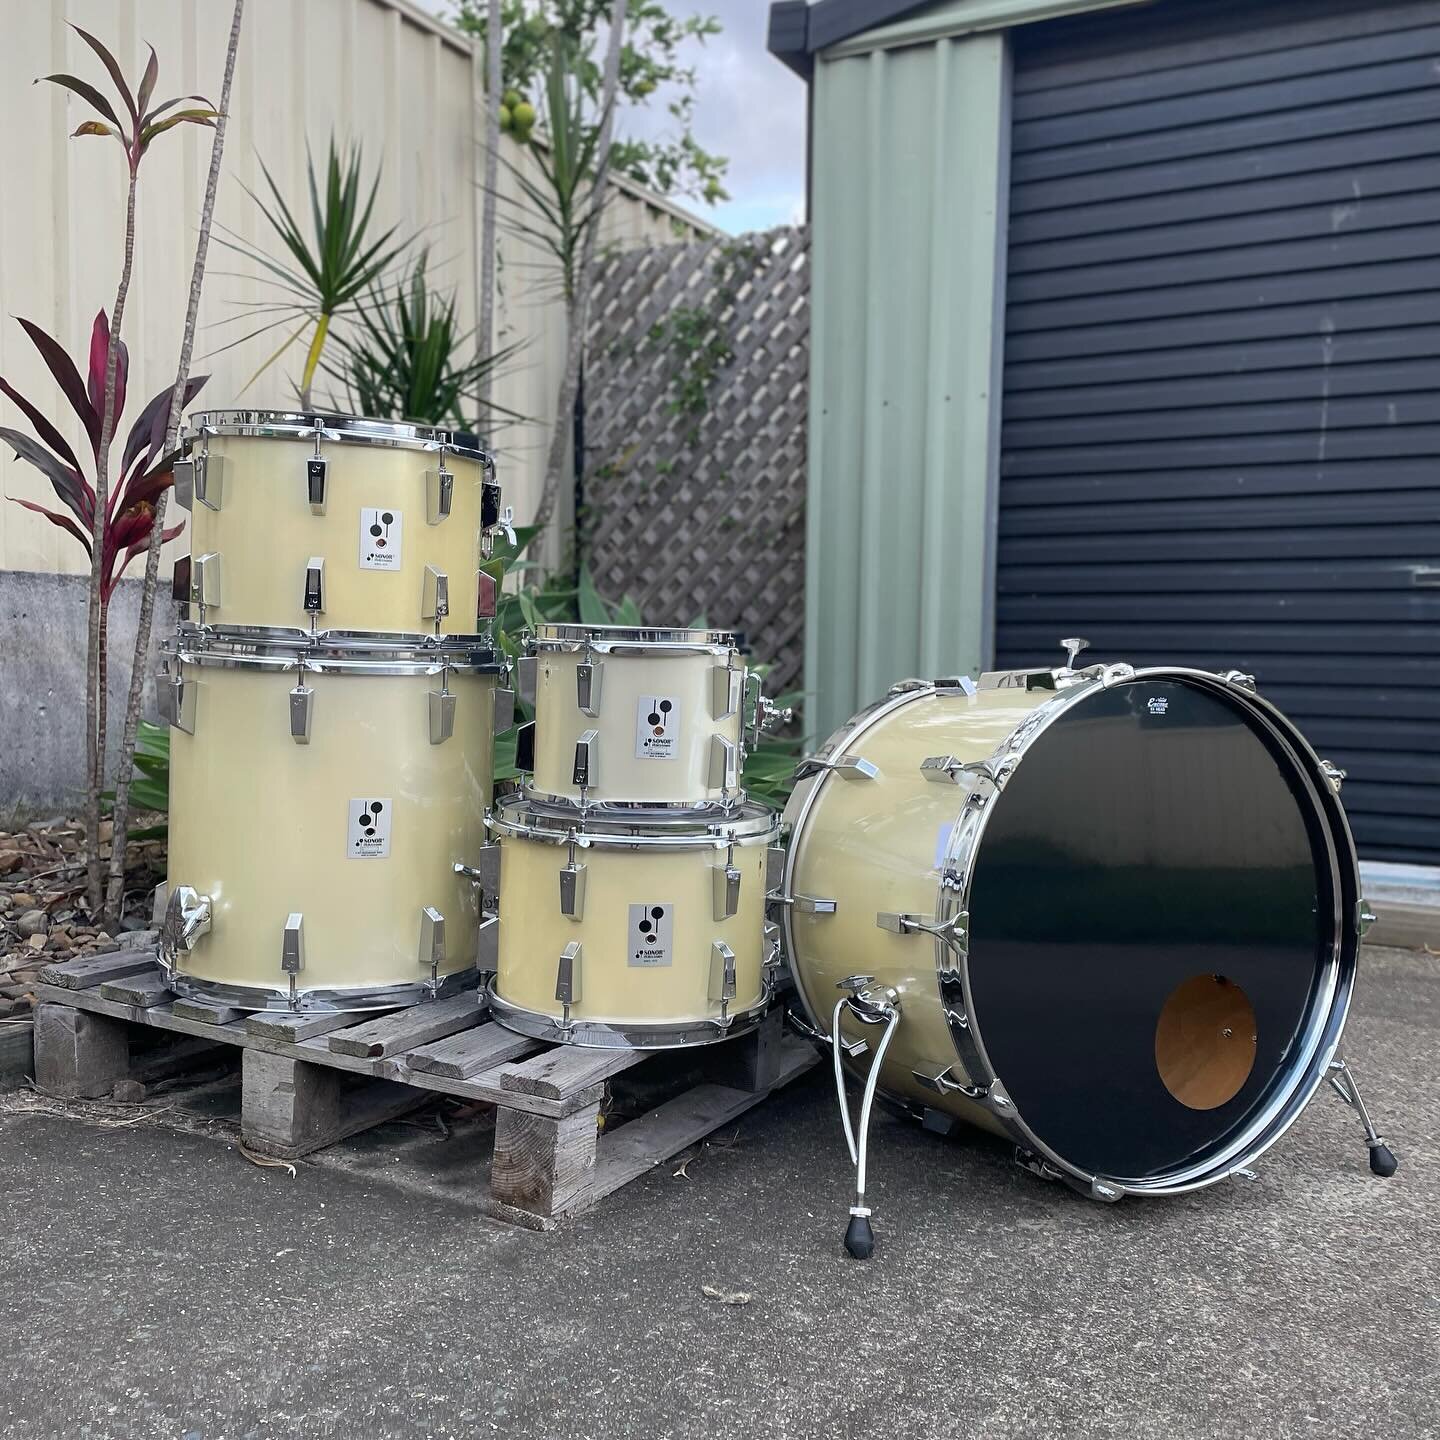 Sonor Phonic shell pack - 22&rdquo;, 10&rdquo;, 13&rdquo;, 14&rdquo;, 16&rdquo;. 
This kit arrived in fair condition but definitely needed attention across all drums. A full strip down / rebuild / upgrade was performed. All bearing edges re-dressed, 